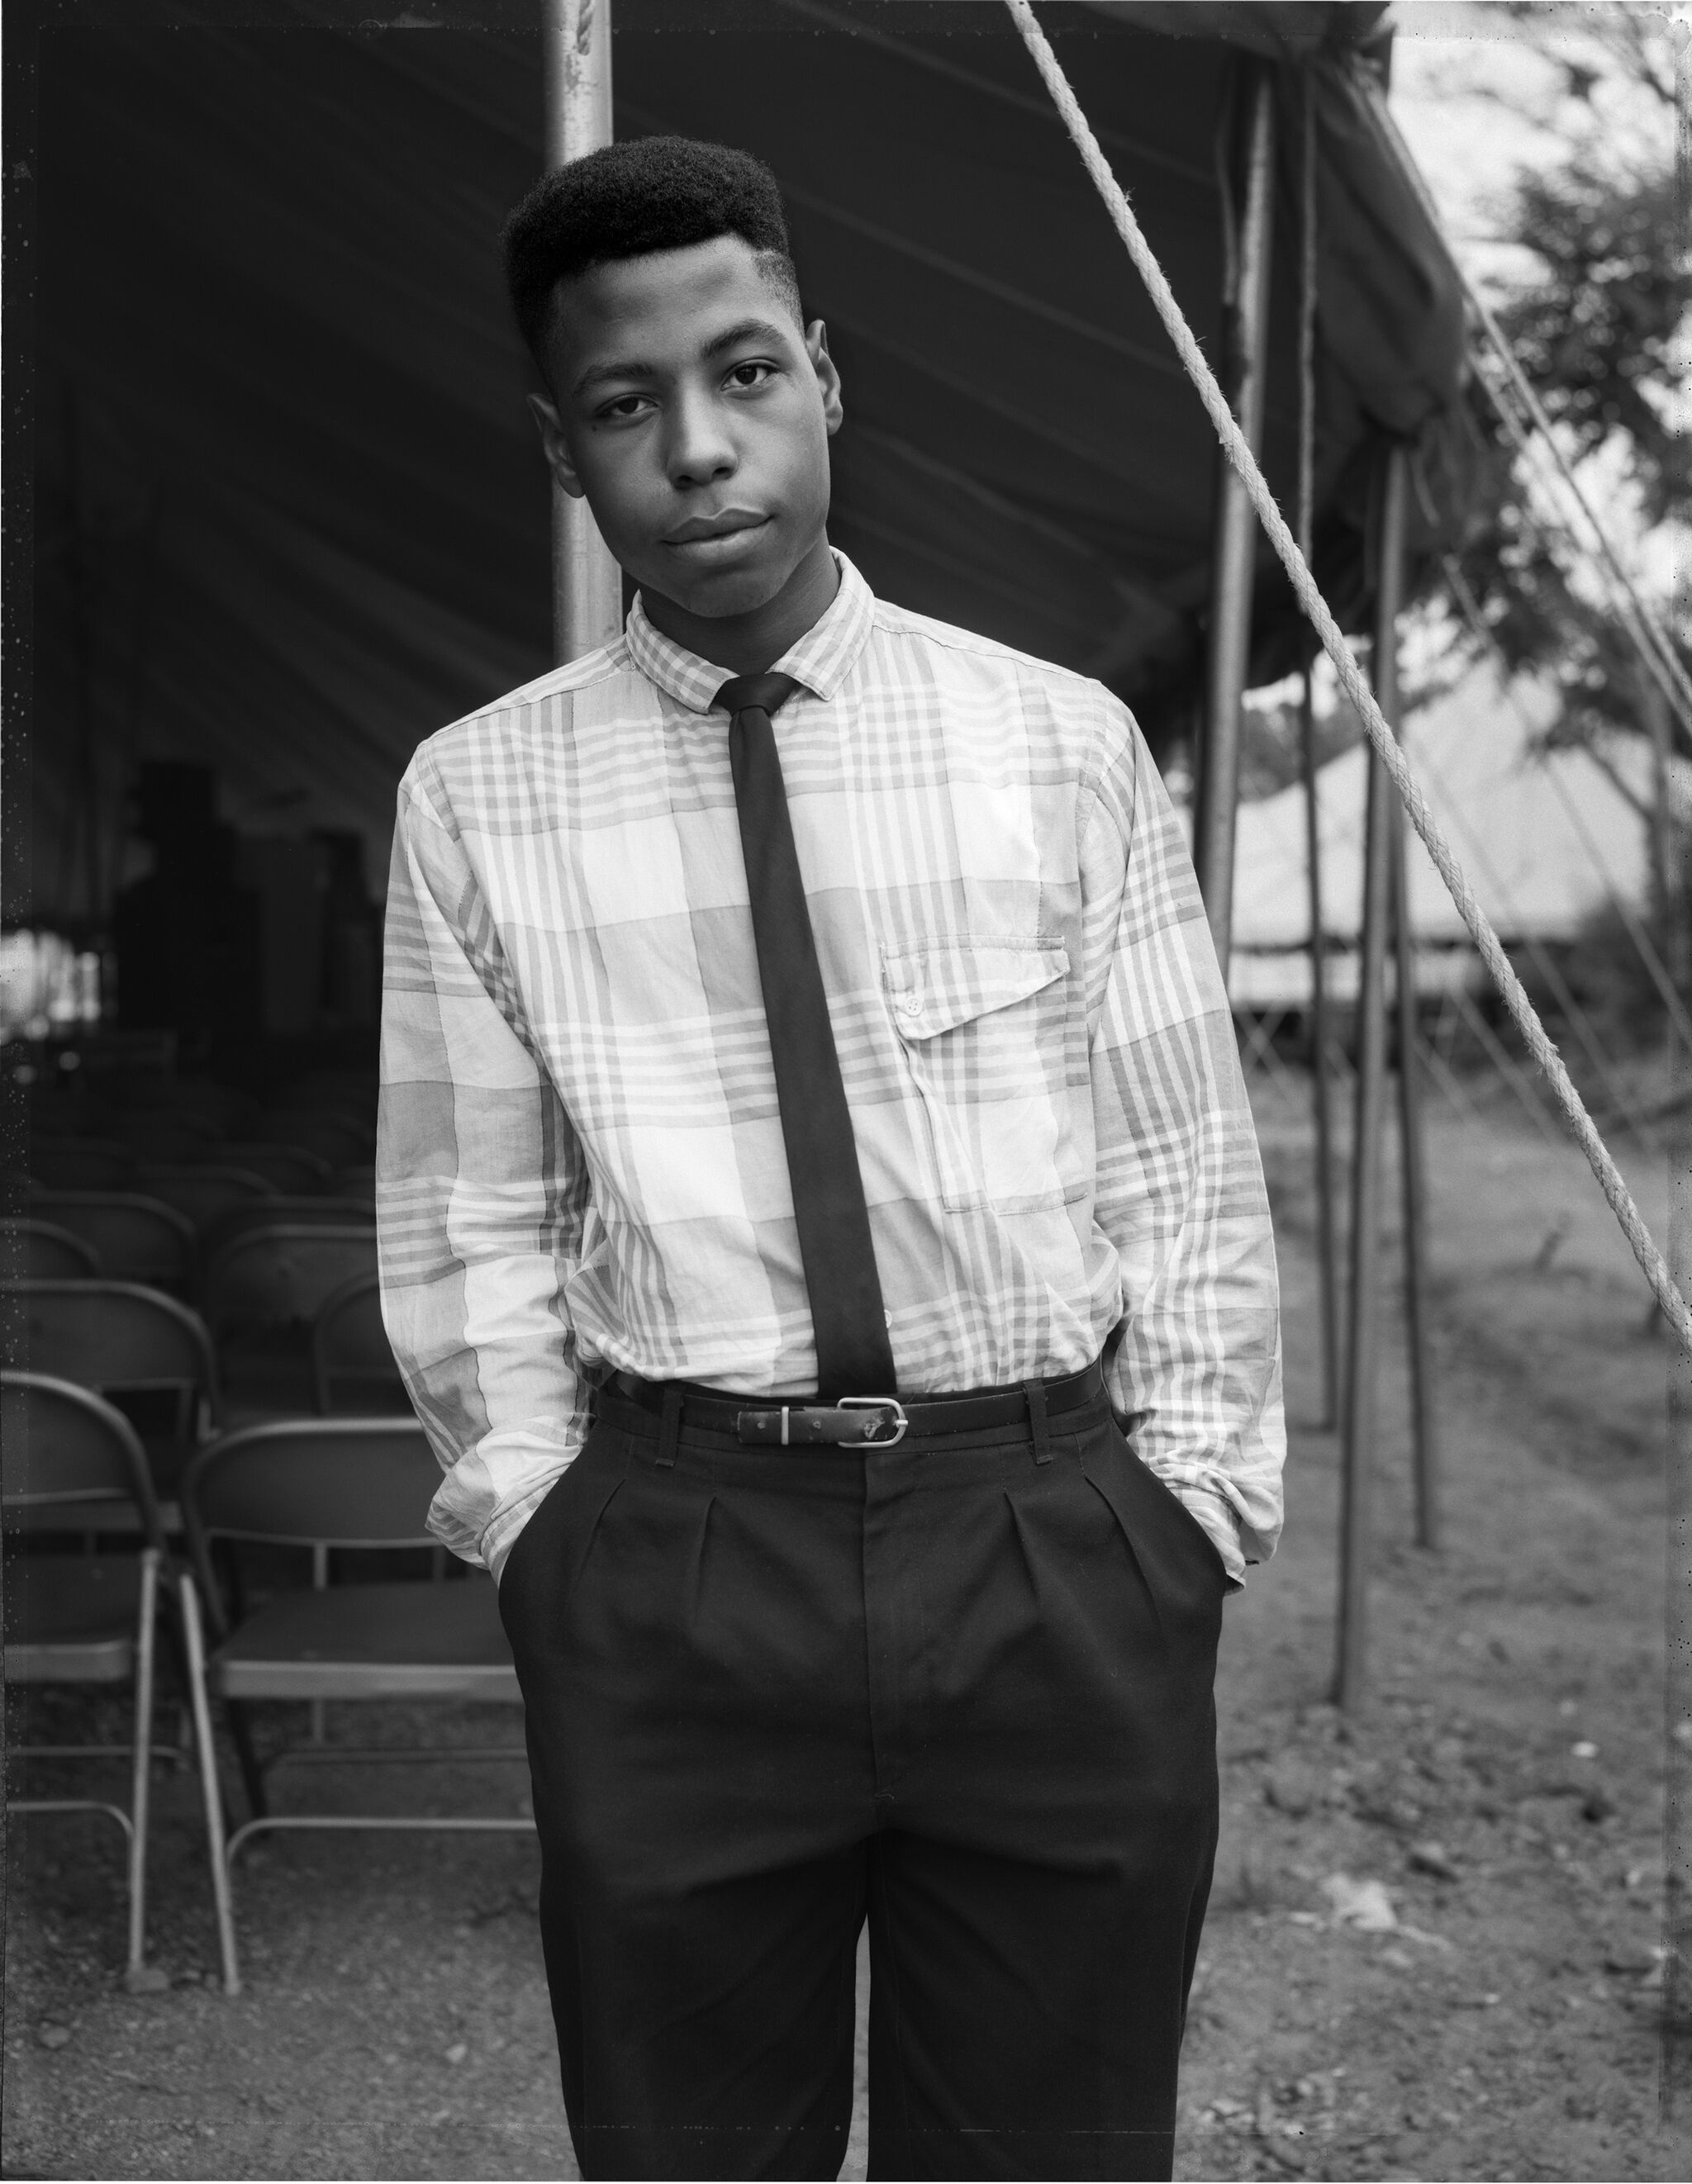 A young black man in formal attire stands in front of a tent and rows of metal chairs. 